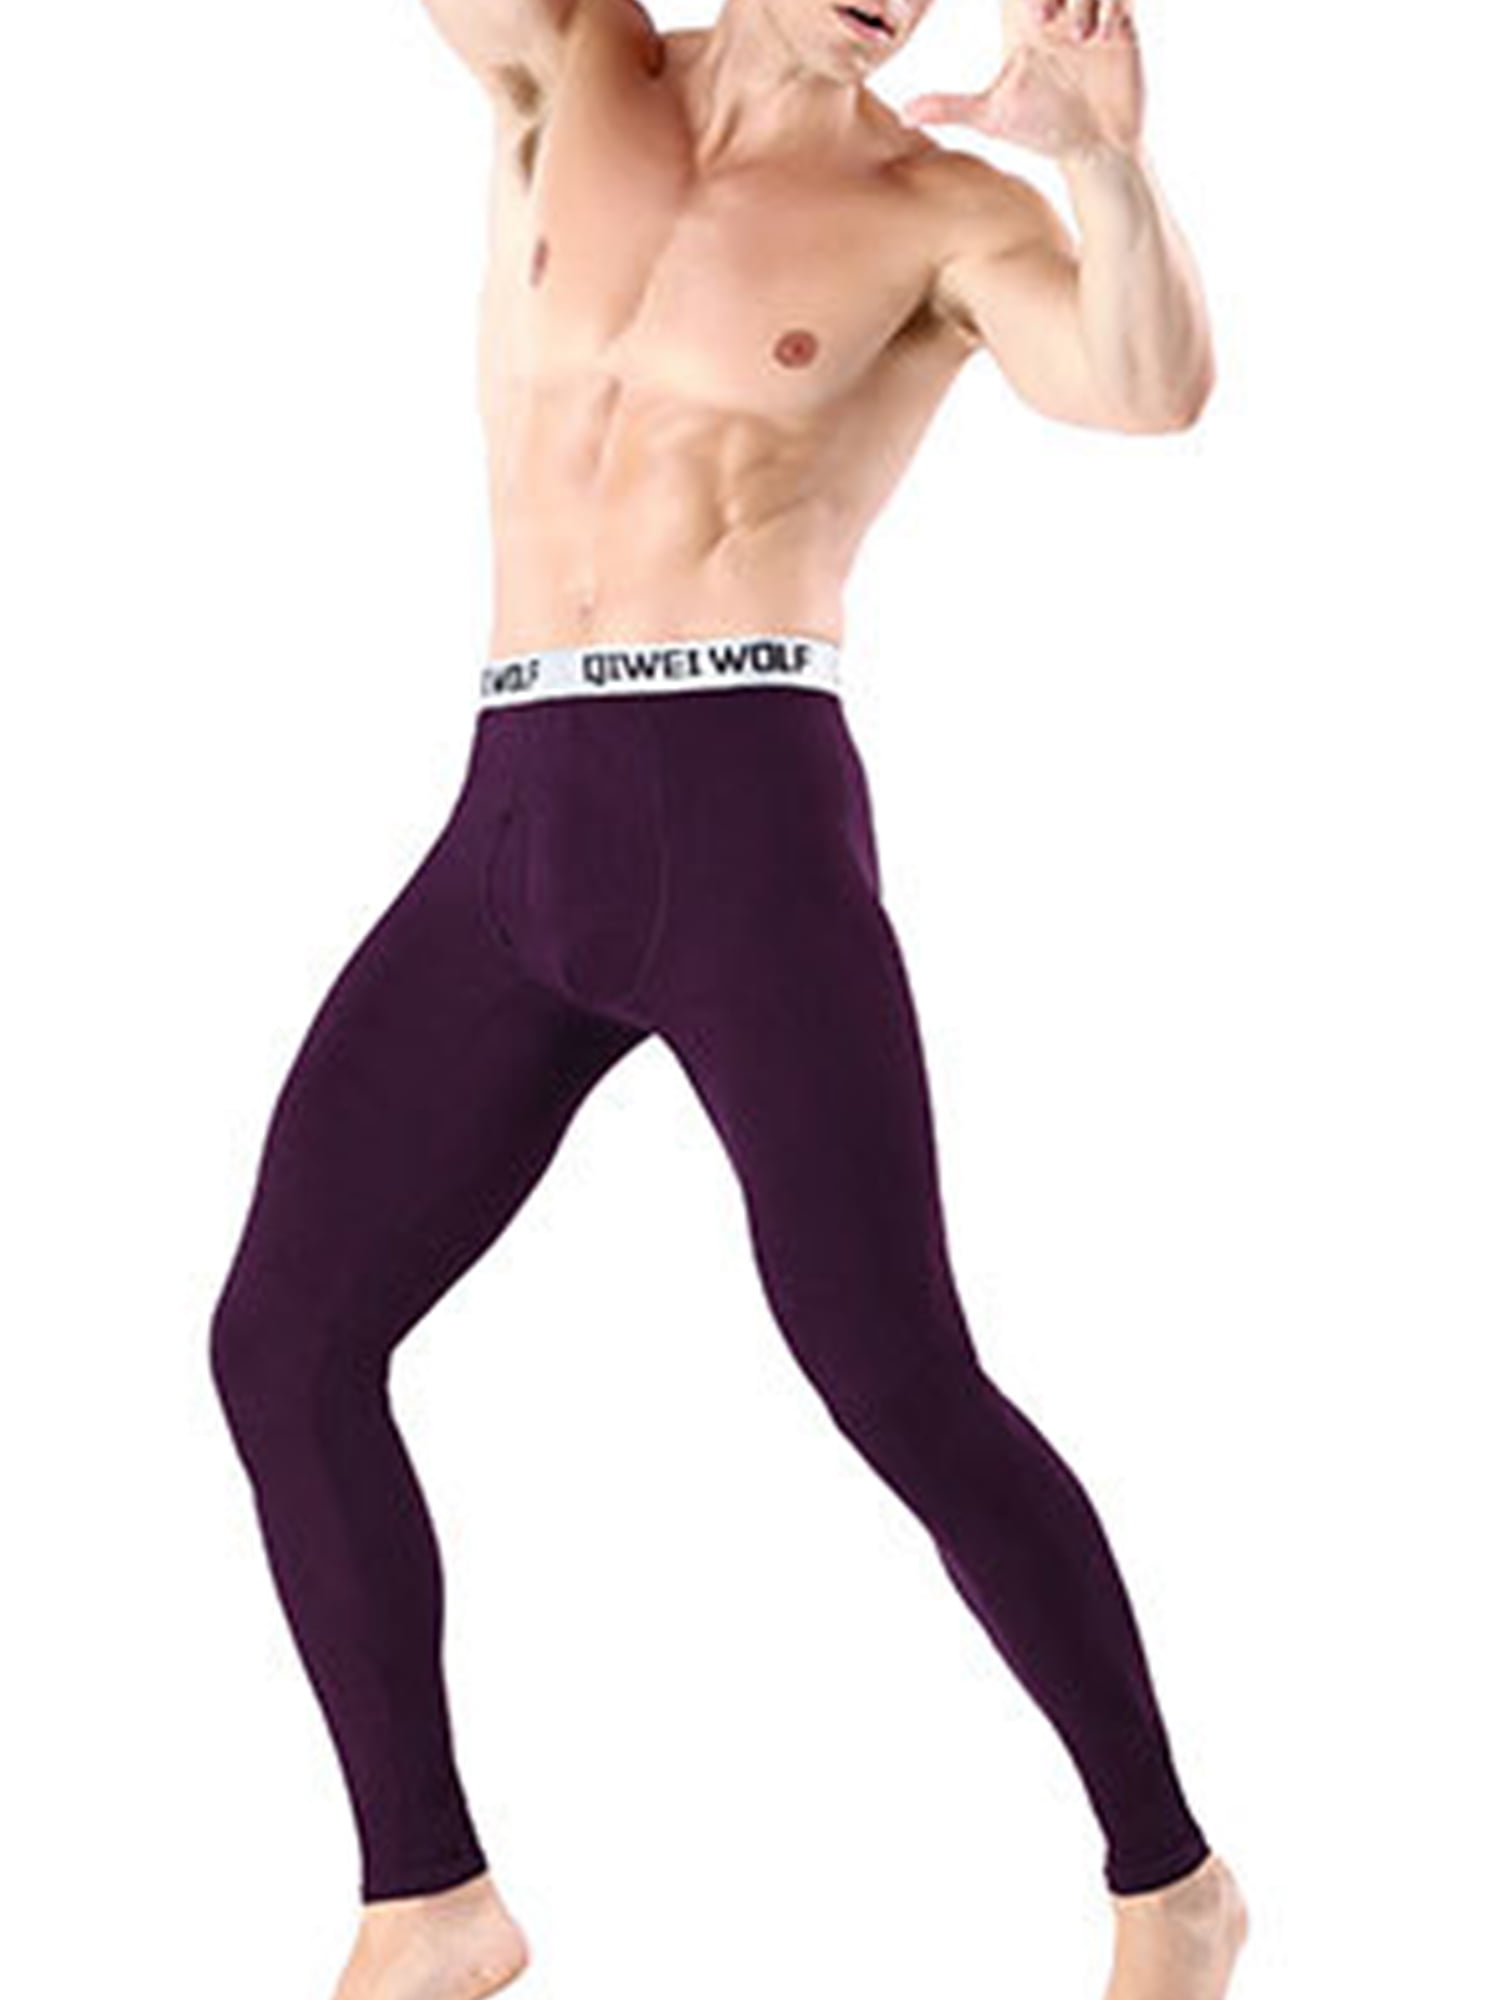 S-3XL Men Compression Thermal Base Layer Tights Bottom Long Pants Gym Activewear 